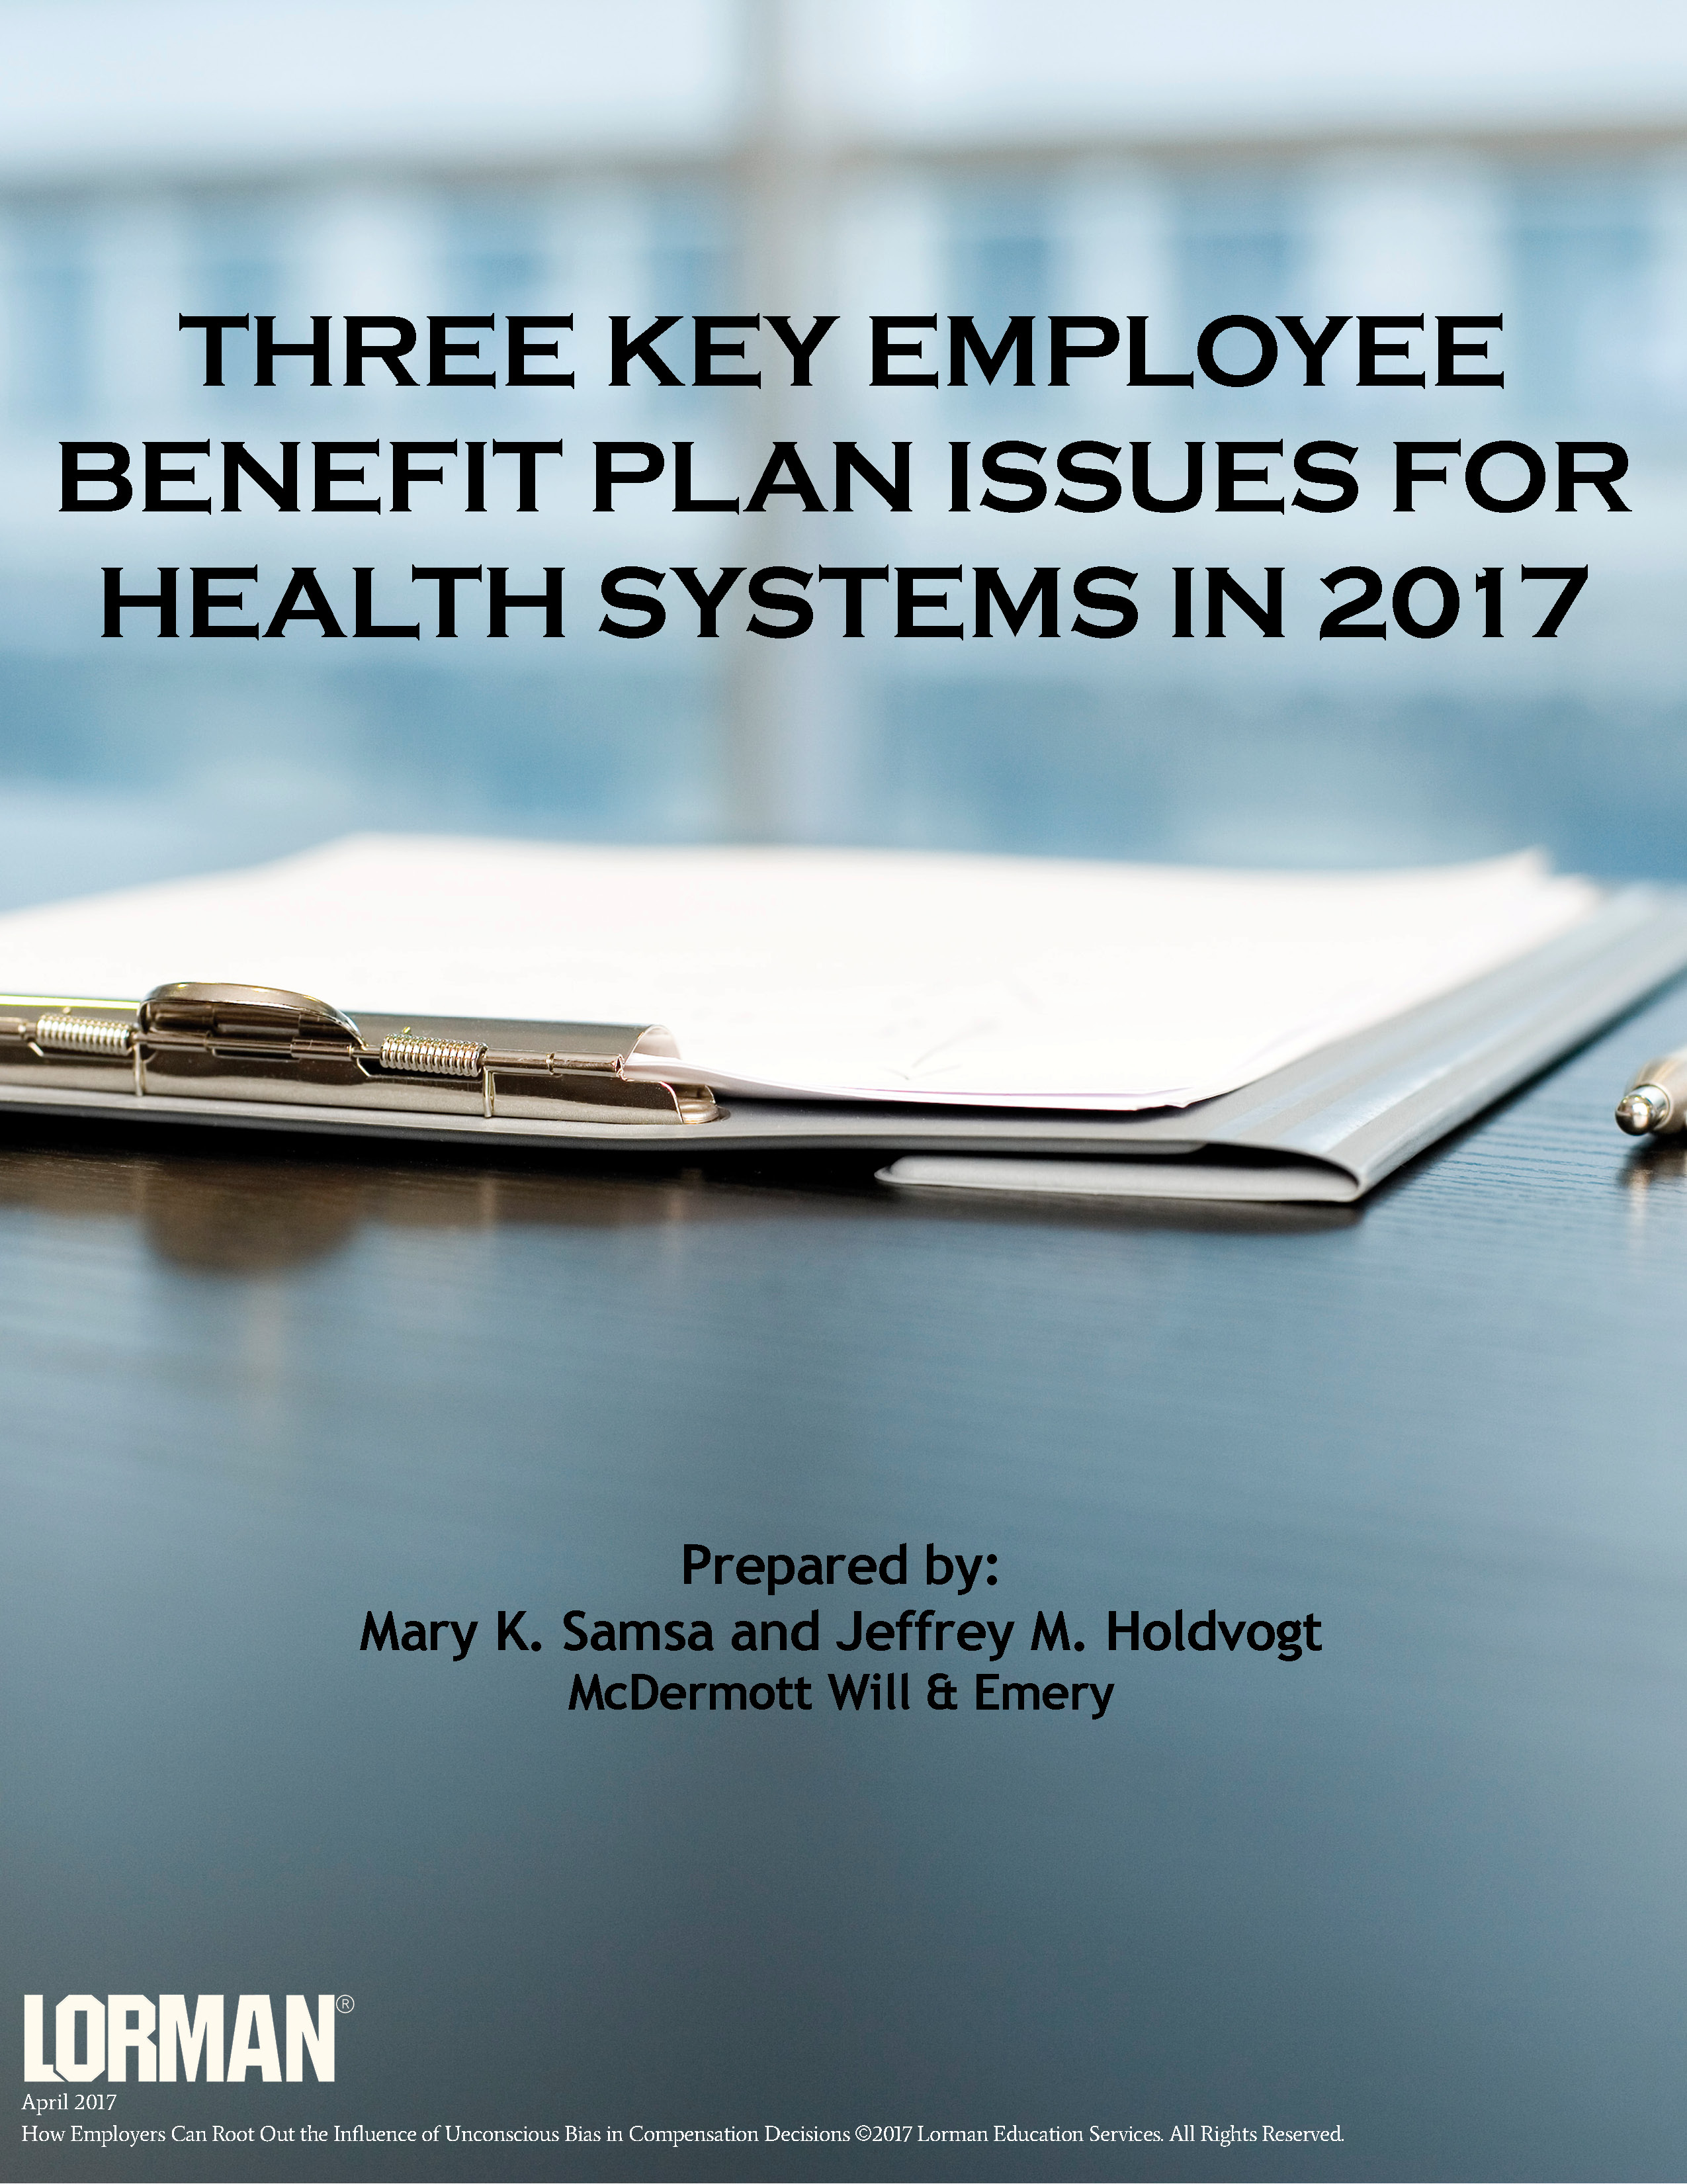 Three Key Employee Benefit Plan Issues for Health Systems in 2017